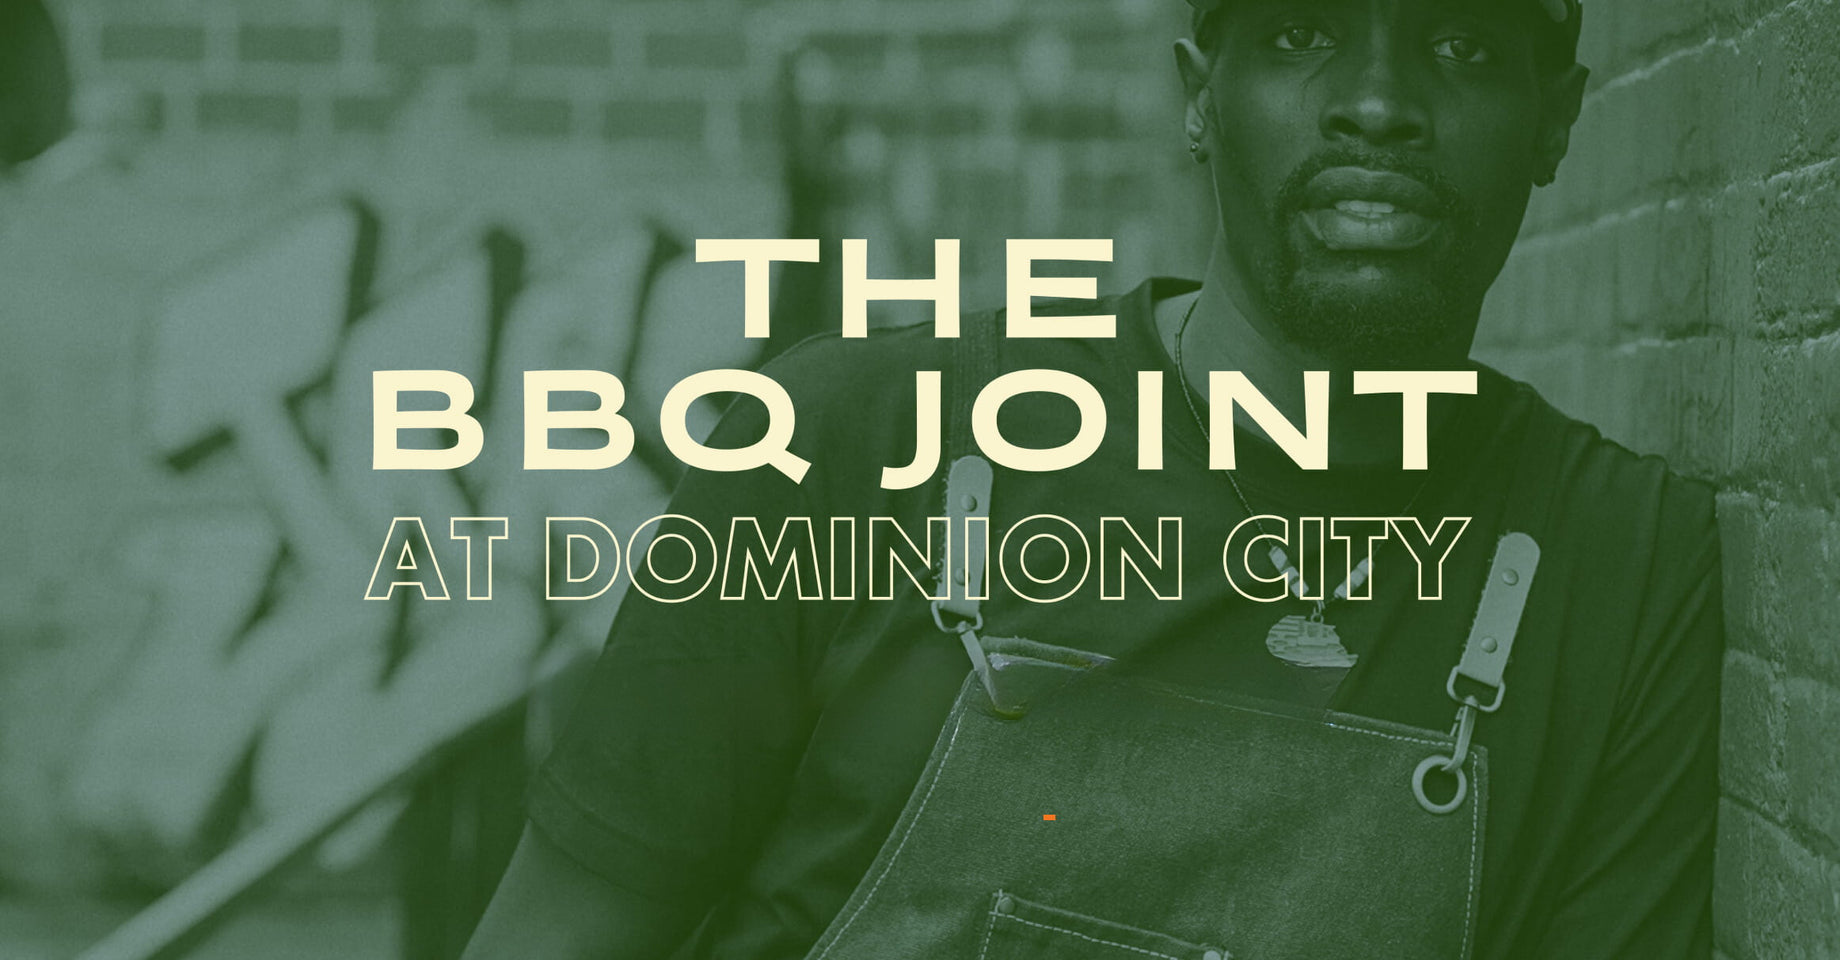 The BBQ Joint at Dominion City